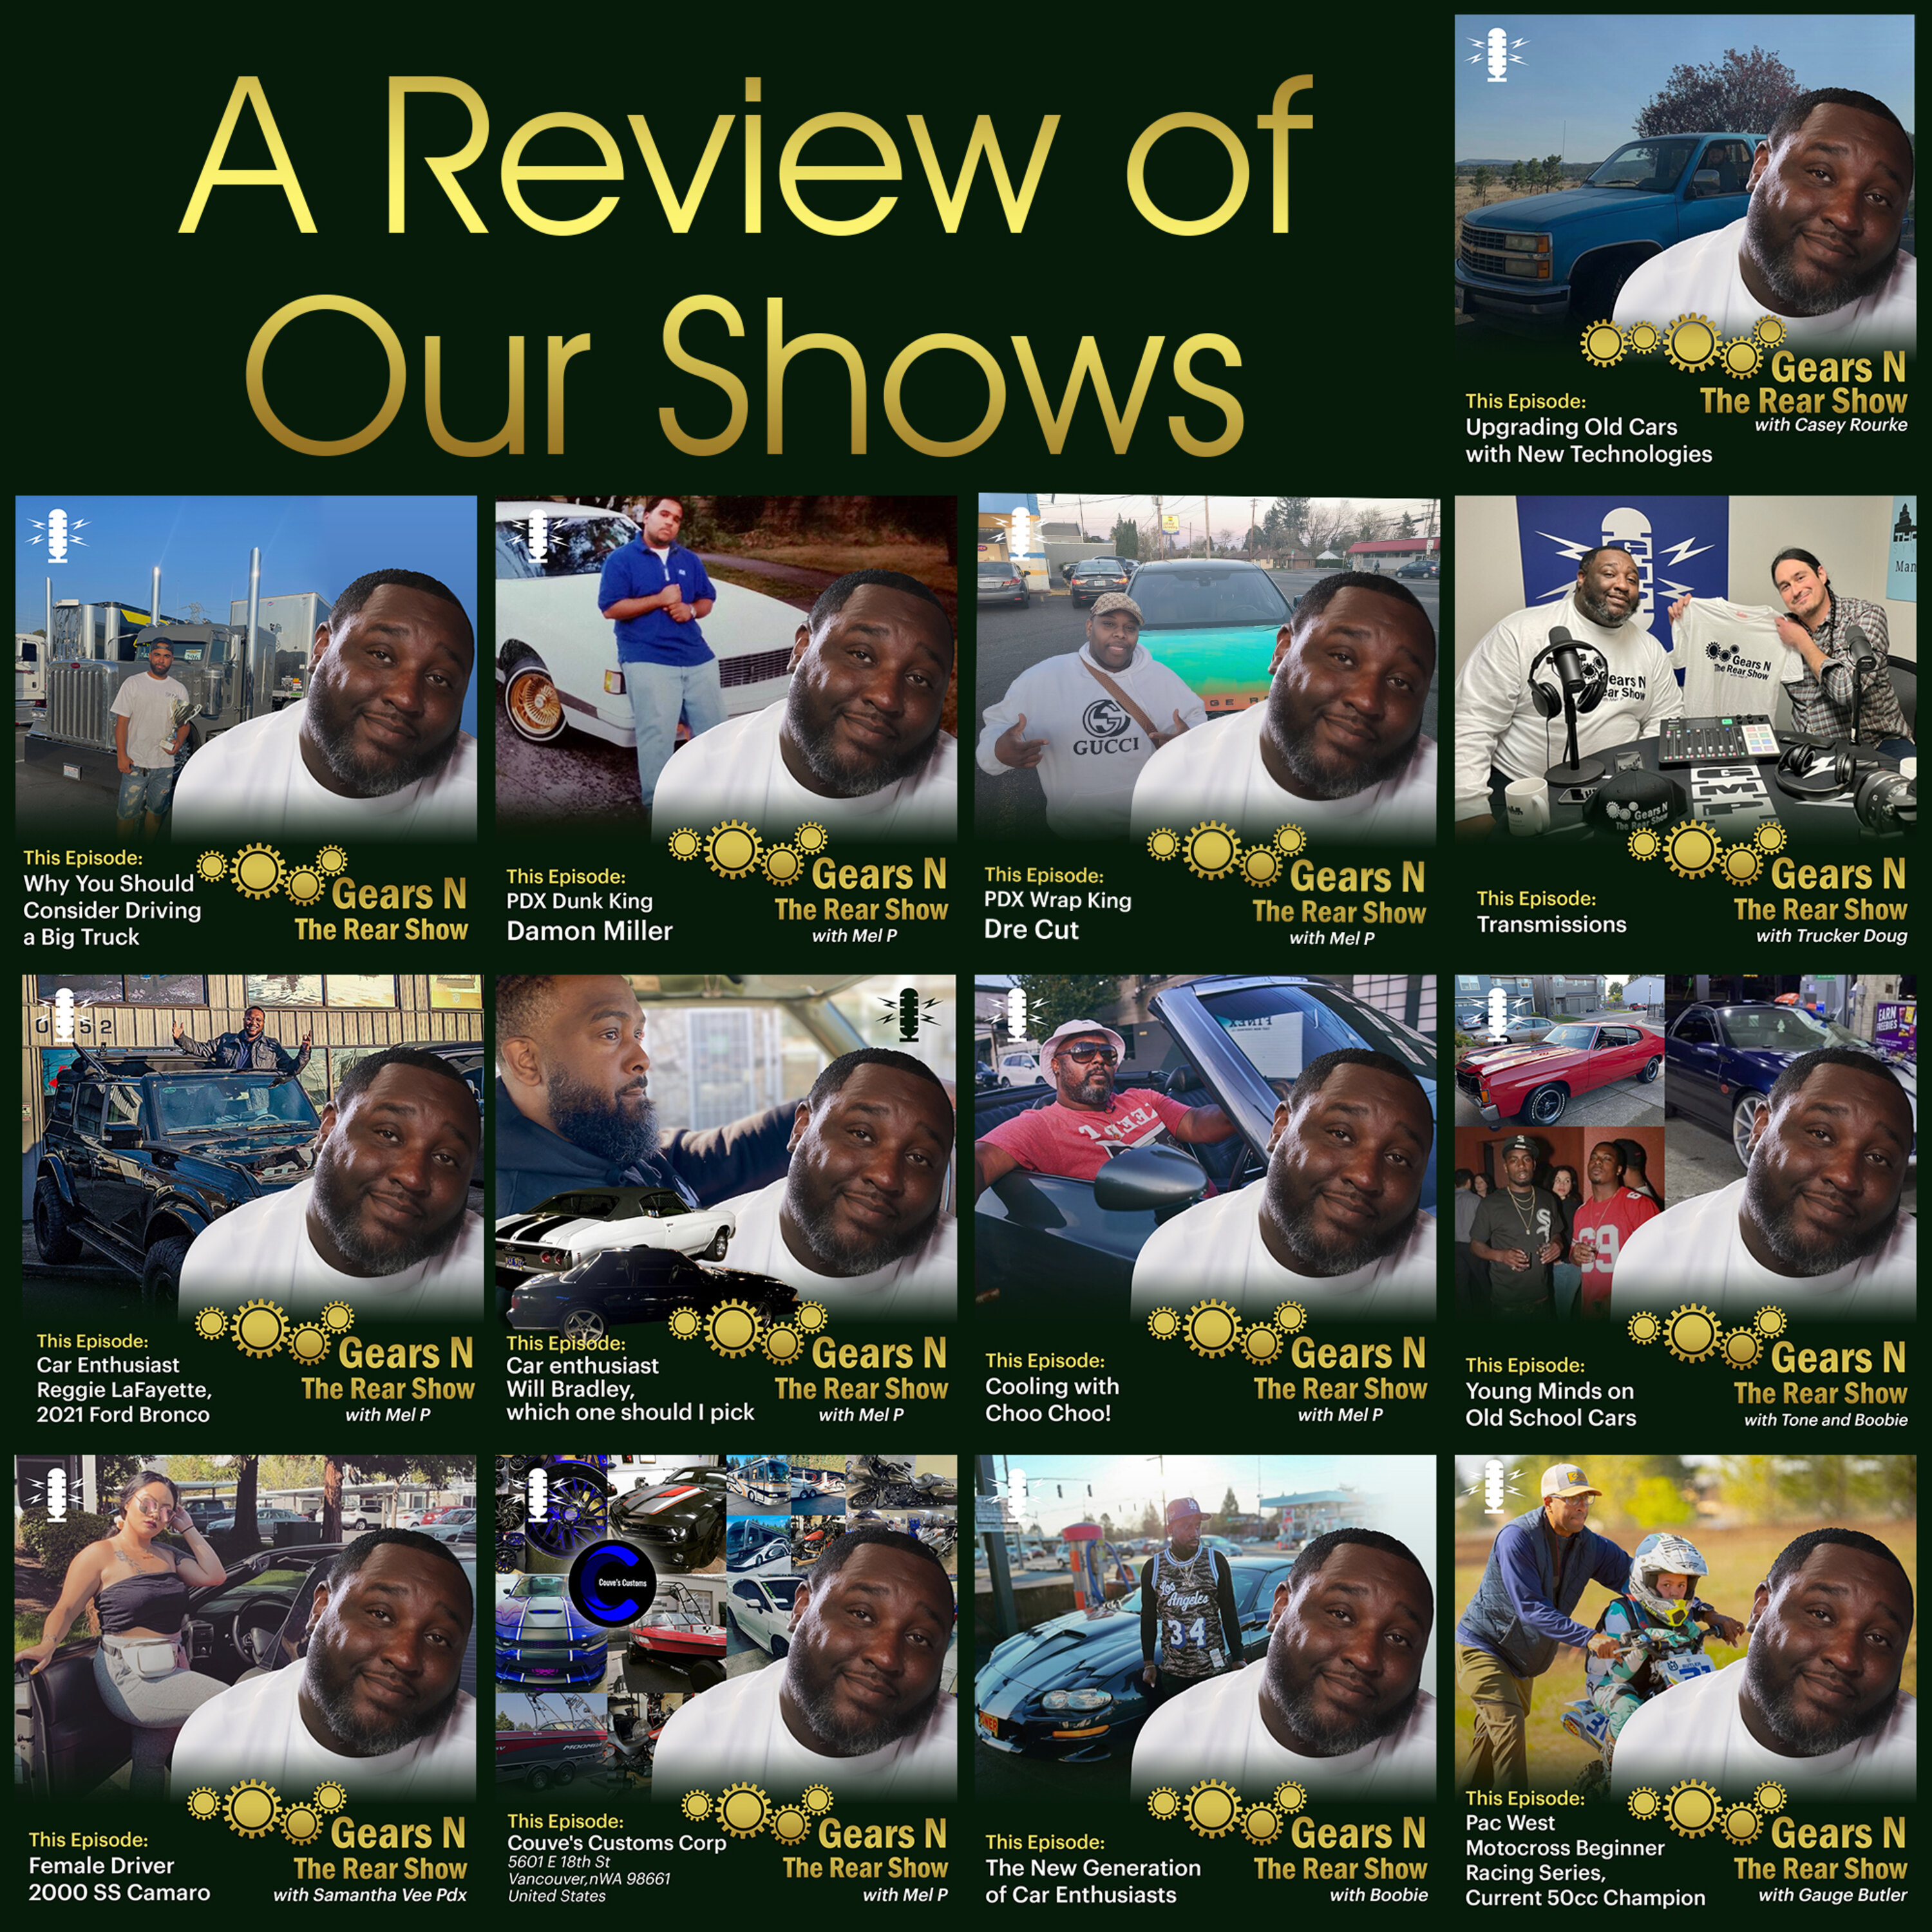 A Review of Our Shows